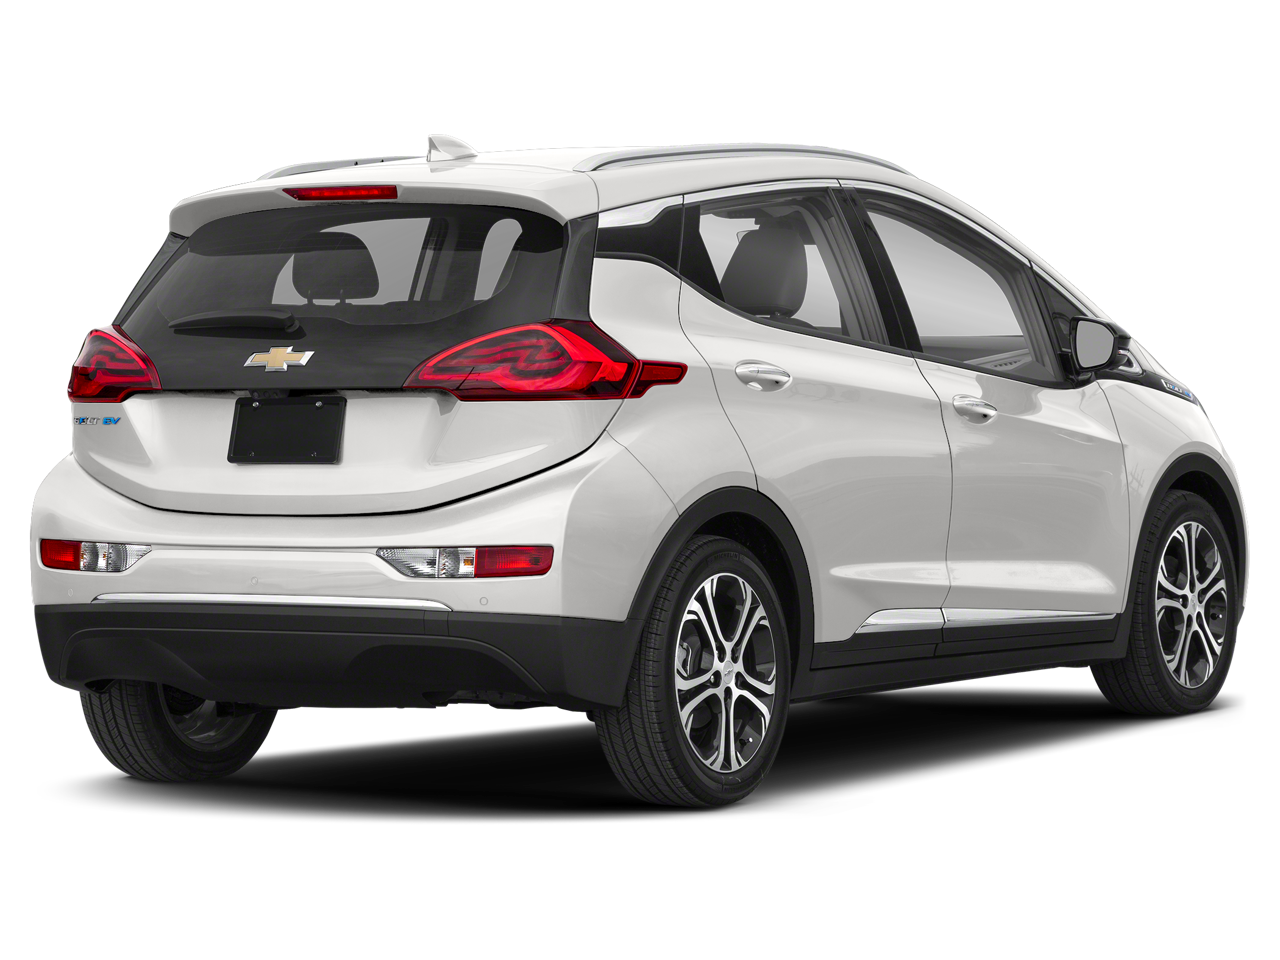 Used 2020 Chevrolet Bolt EV Premier with VIN 1G1FX6S0XL4104684 for sale in Upland, CA